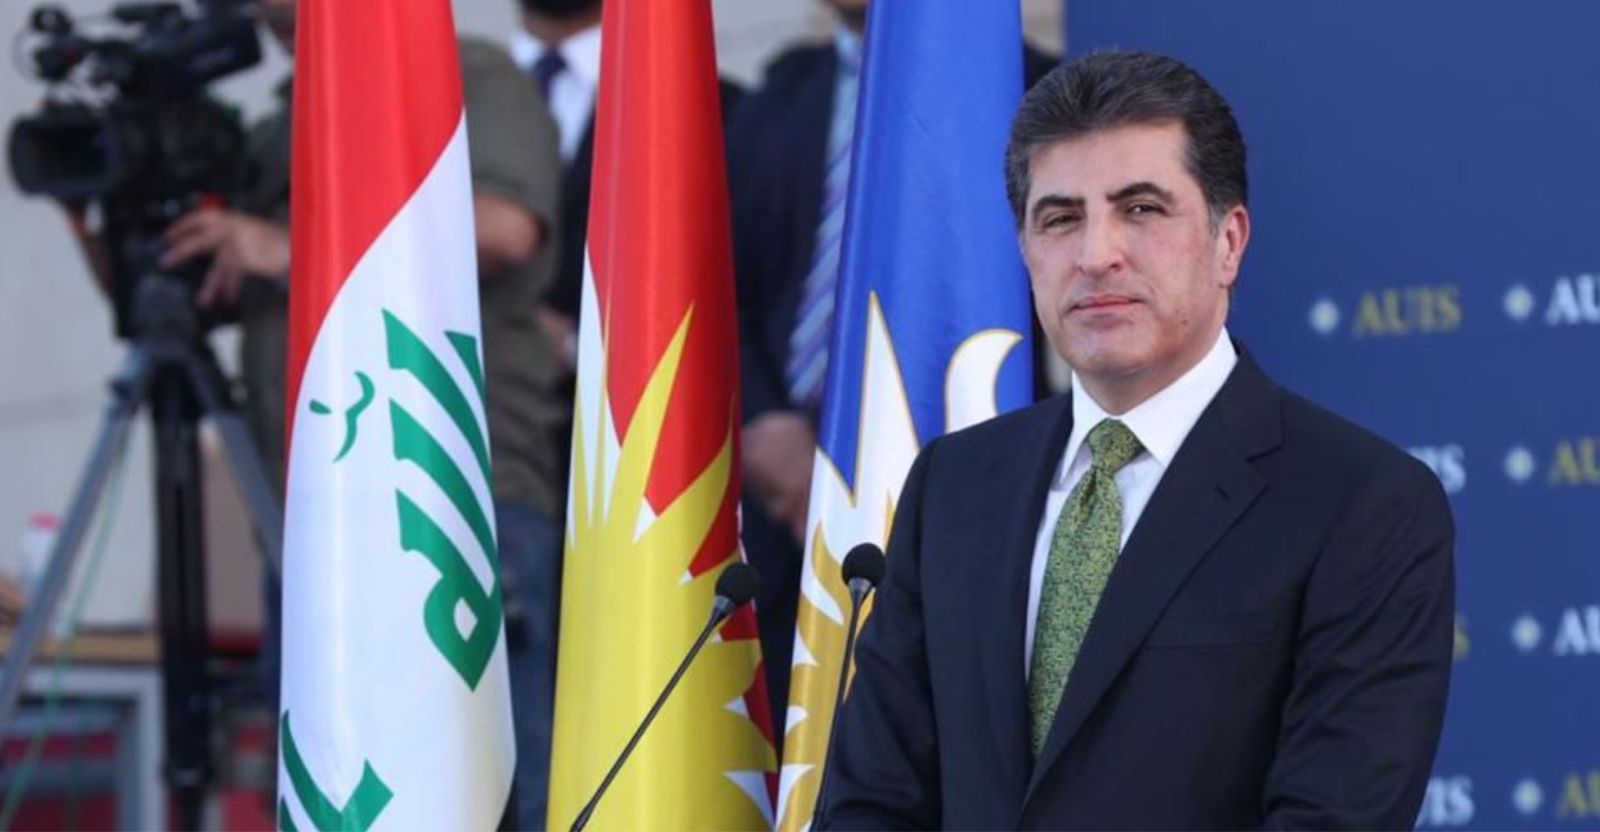 KDP notifies diplomatic entities of its nonparticipation in Kurdistan elections